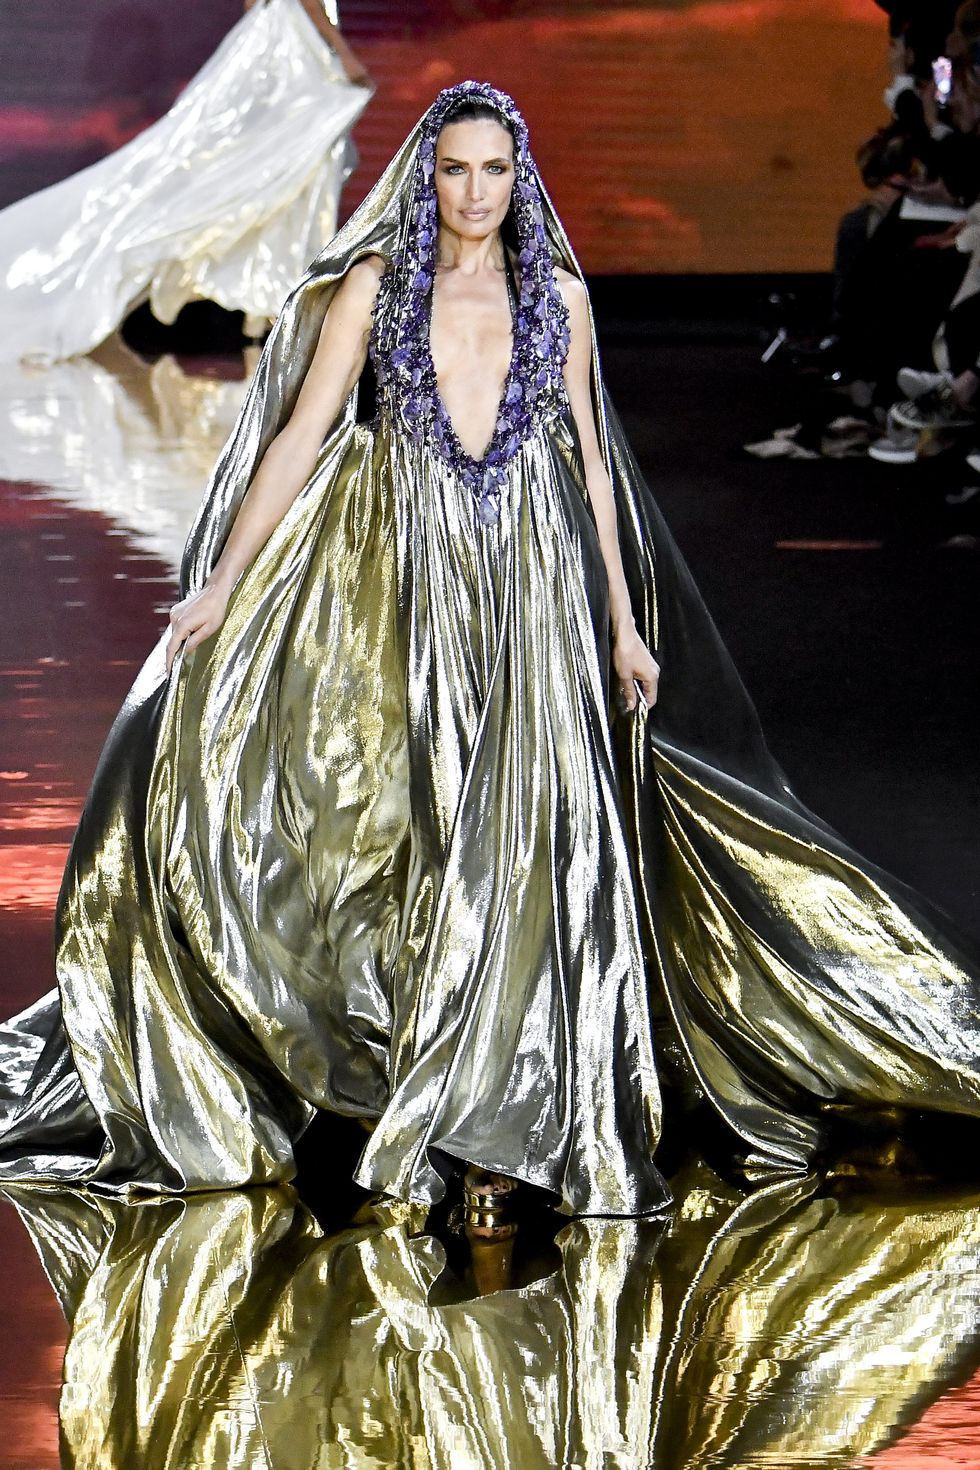 paris, france january 24 nieves alvarez walks the runway during the stephane rolland haute couture springsummer 2023 fashion show as part of the paris haute couture week on january 24, 2023 in paris, france photo by victor virgilegamma rapho via getty images